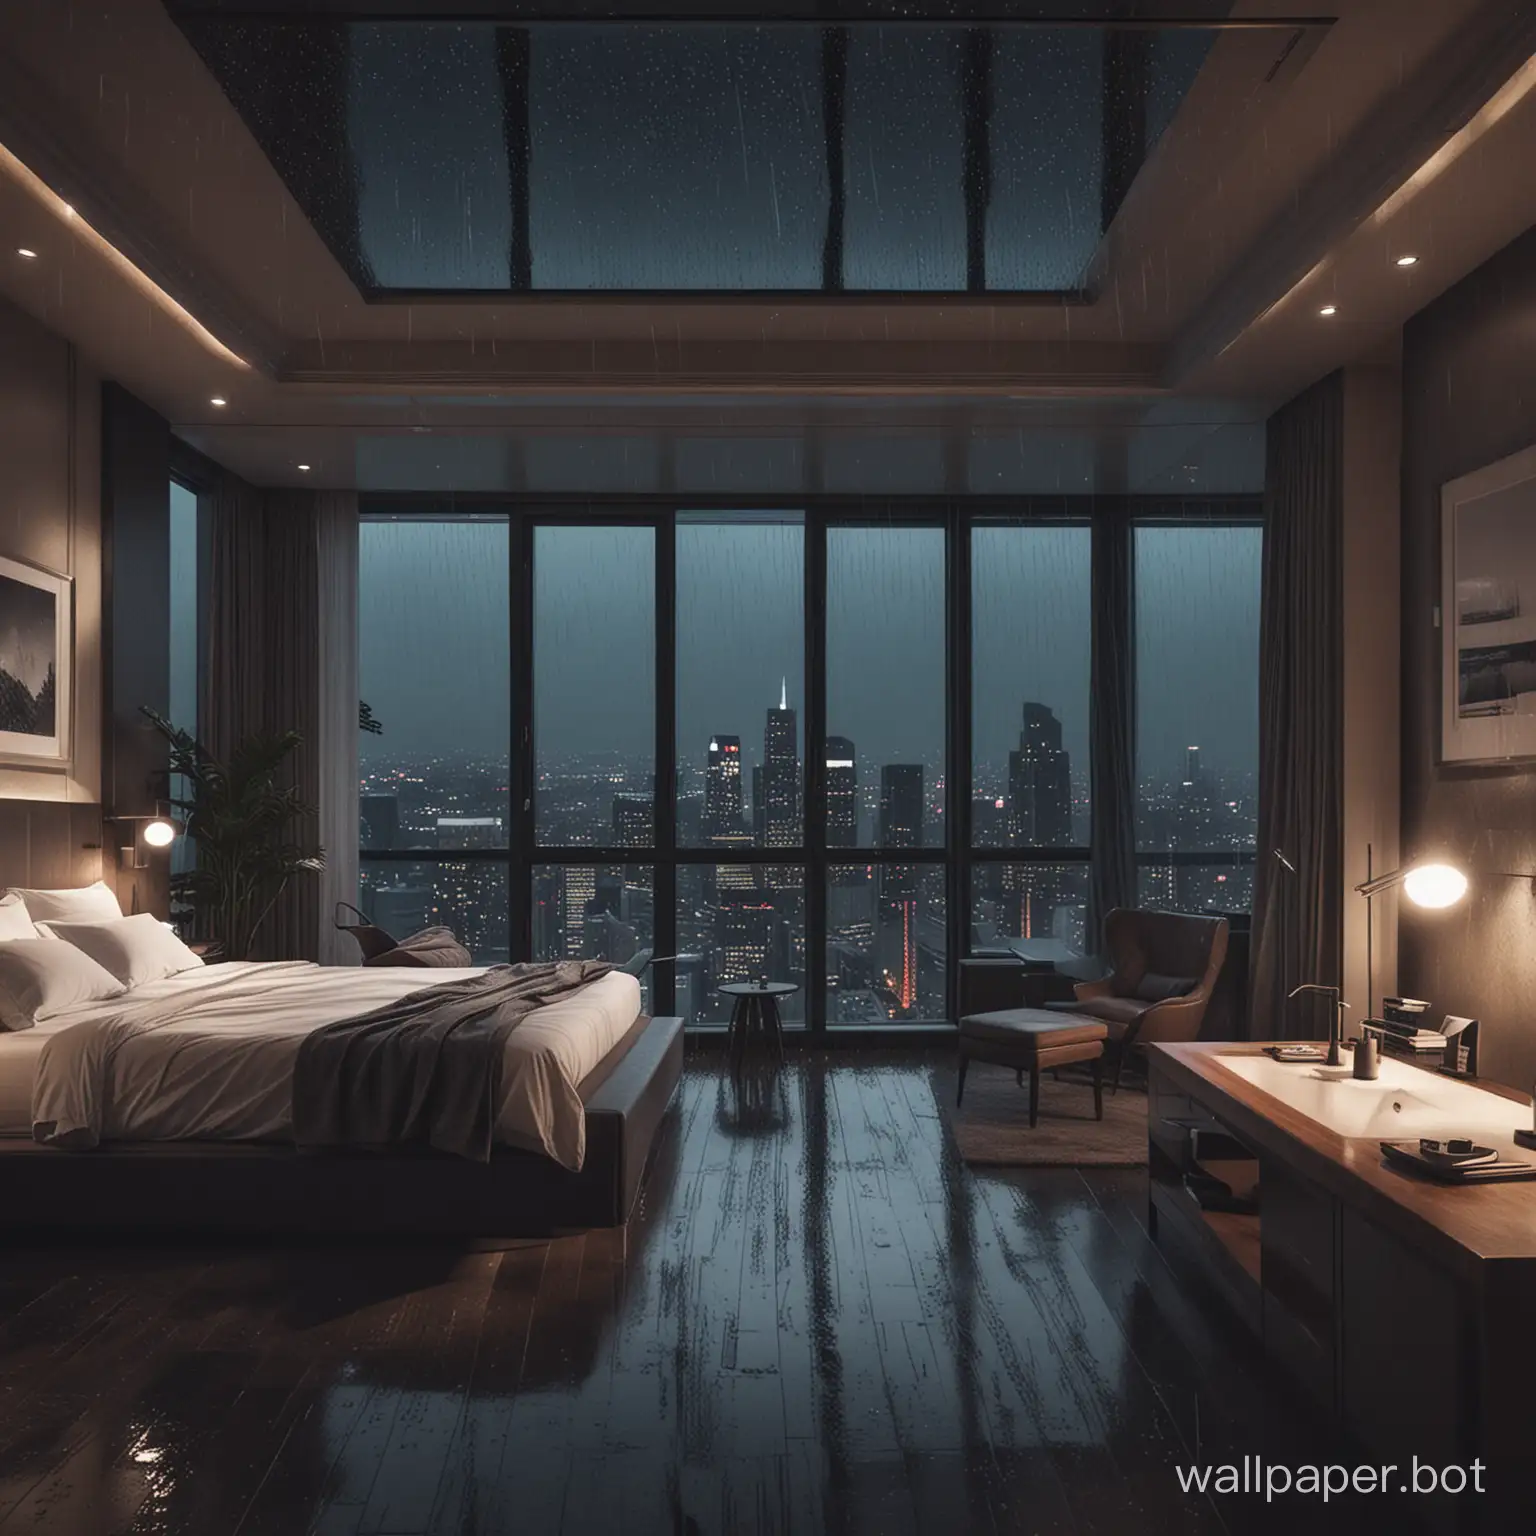 Rainy night in a penthouse suite in a bedroom